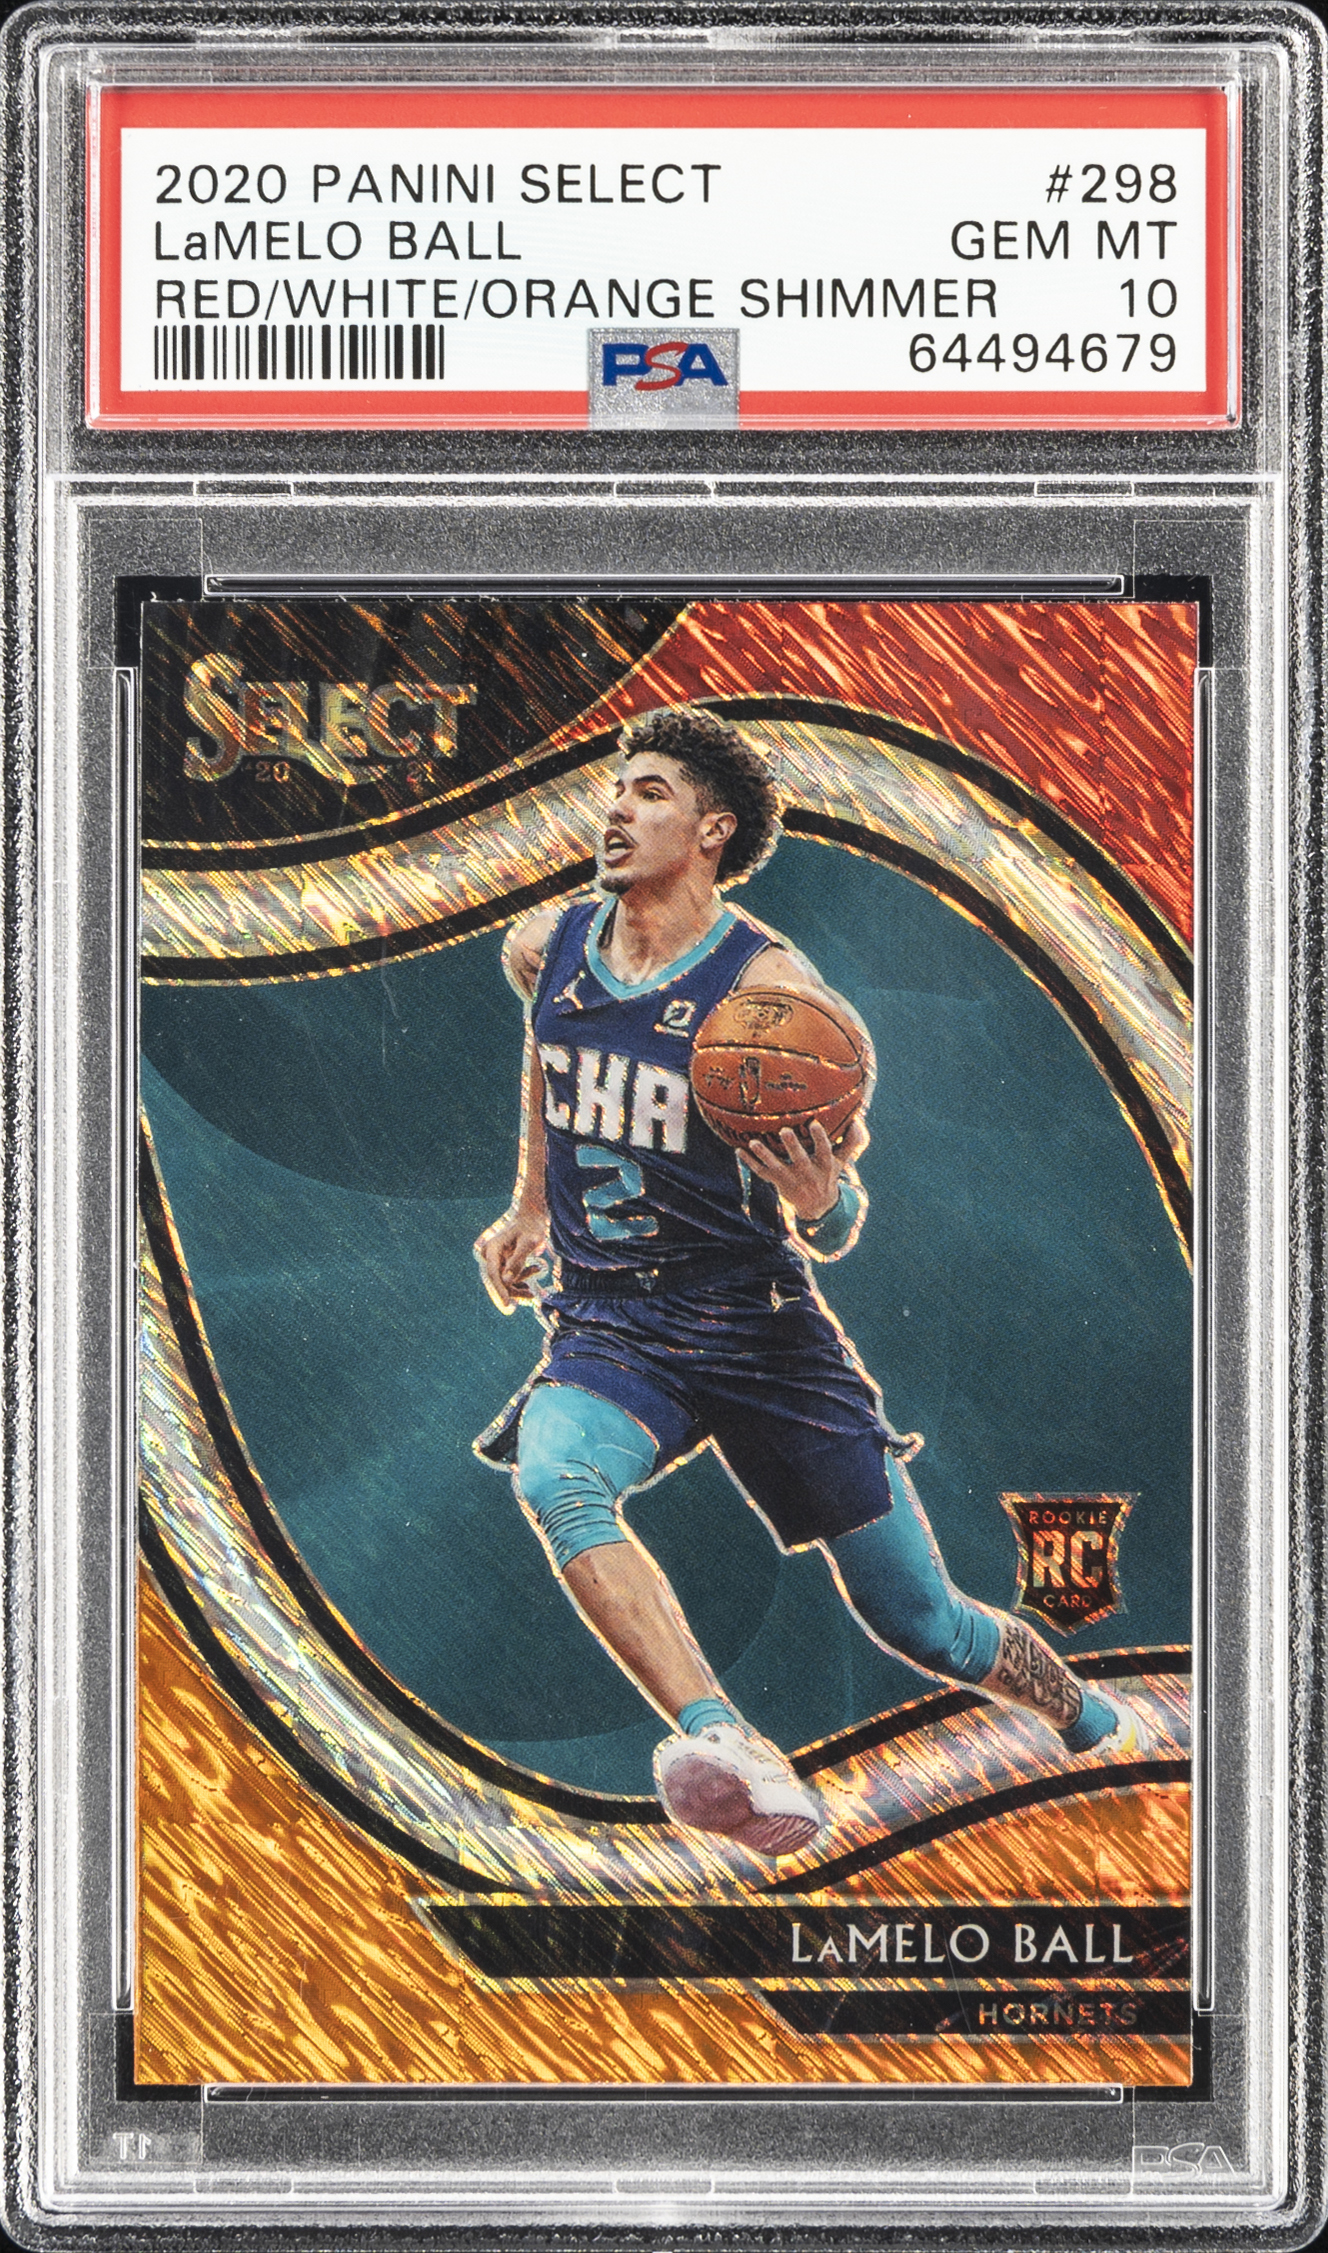 2020-21 Panini Select Red/White/Orange Shimmer #298 Lamelo Ball Rookie Card – PSA GEM MT 10